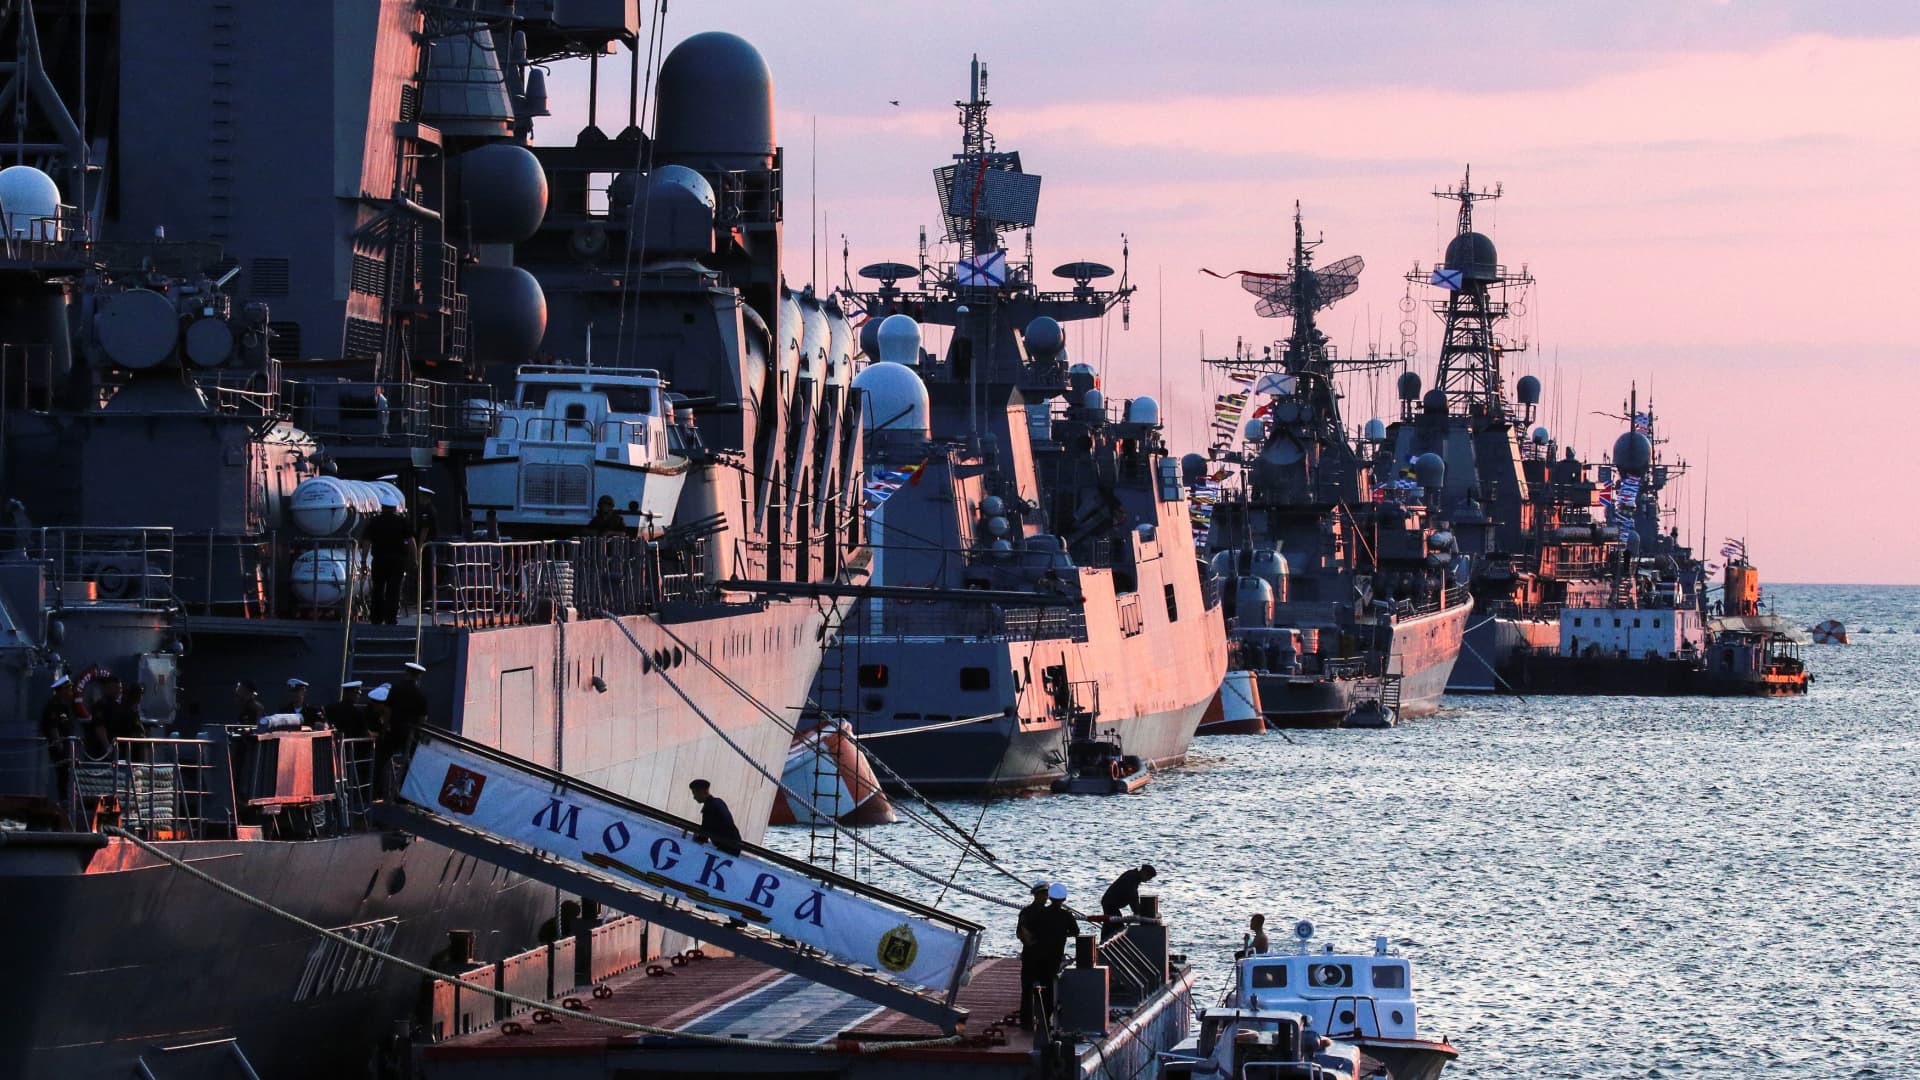 Russian warships are seen ahead of the Navy Day parade in the Black Sea port of Sevastopol, Crimea July 23, 2021.